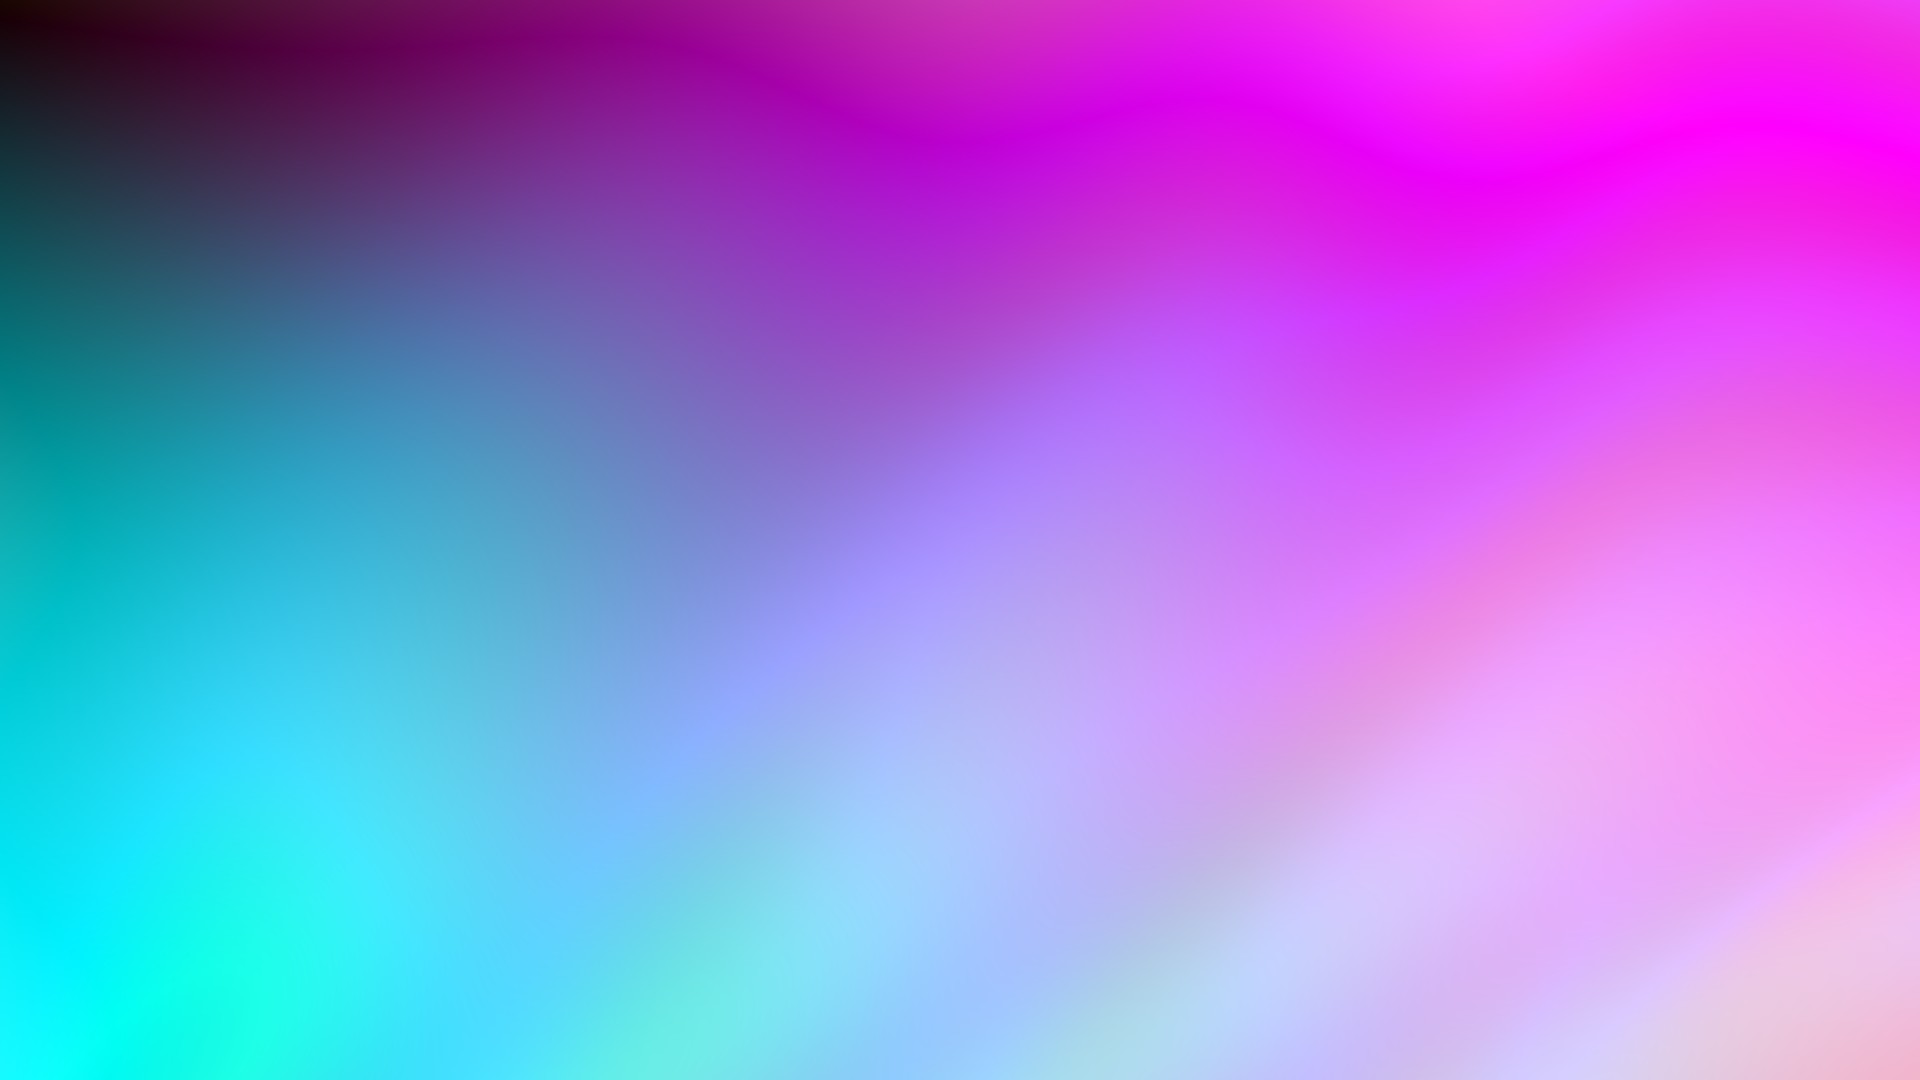 How Can I Make Plex Gradient Image Like These In